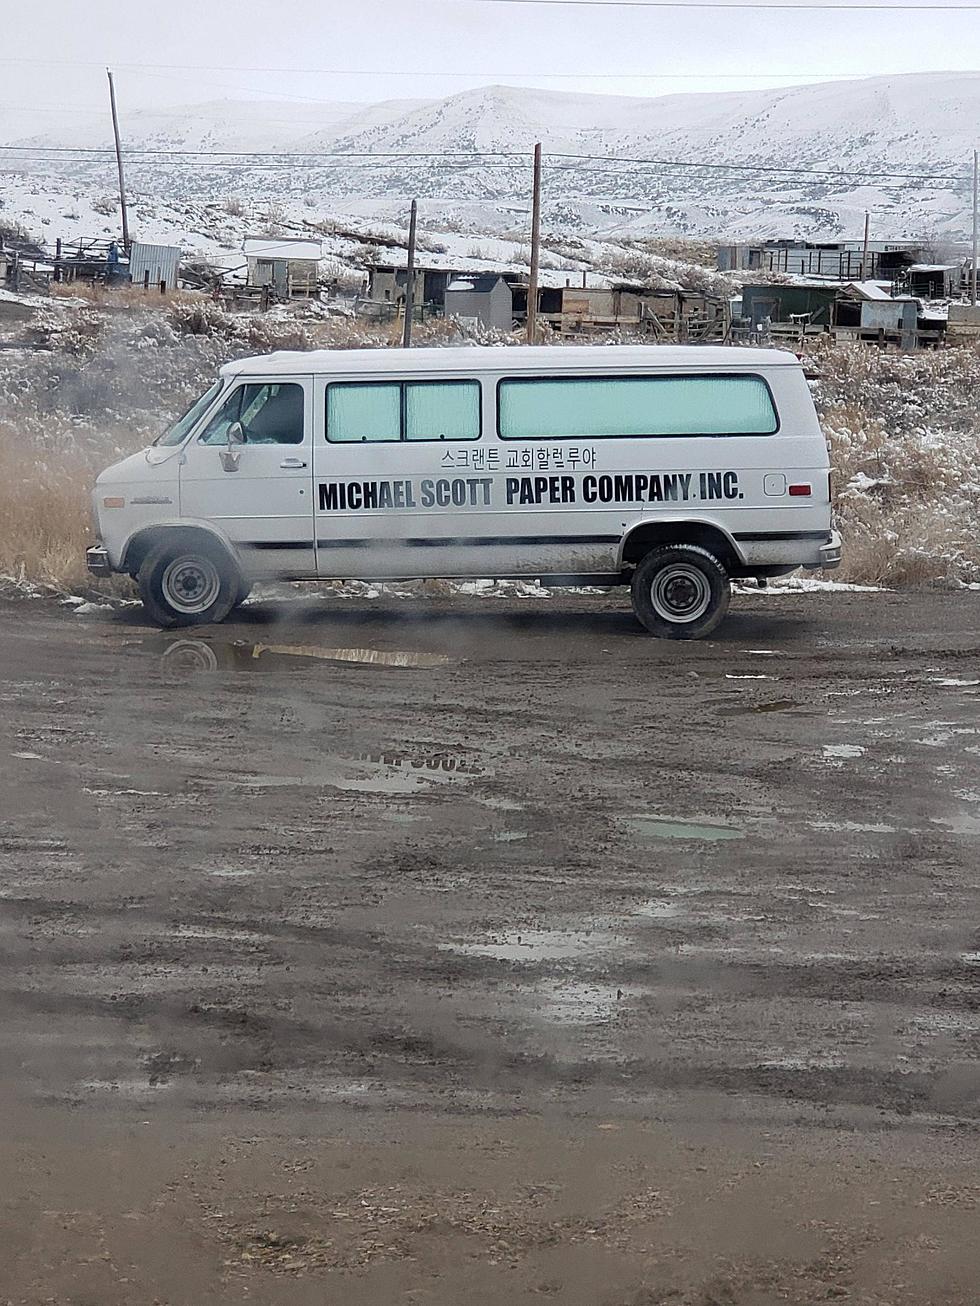 A Piece Of Memorabilia From The Office Has Been Spotted In Wyo